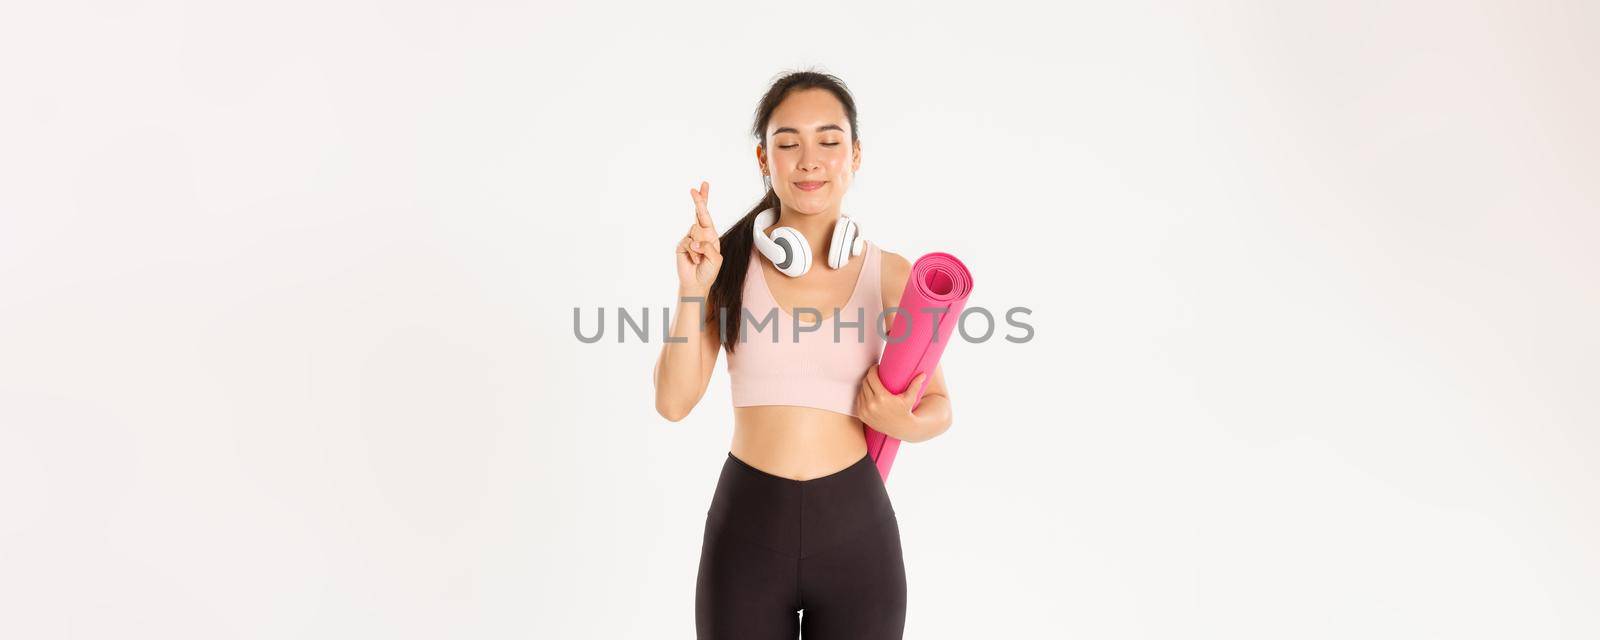 Sport, wellbeing and active lifestyle concept. Hopeful cute asian girl dreaming of going to gym after covid-19 quarantine, holding rubber mat and cross fingers while making wish.